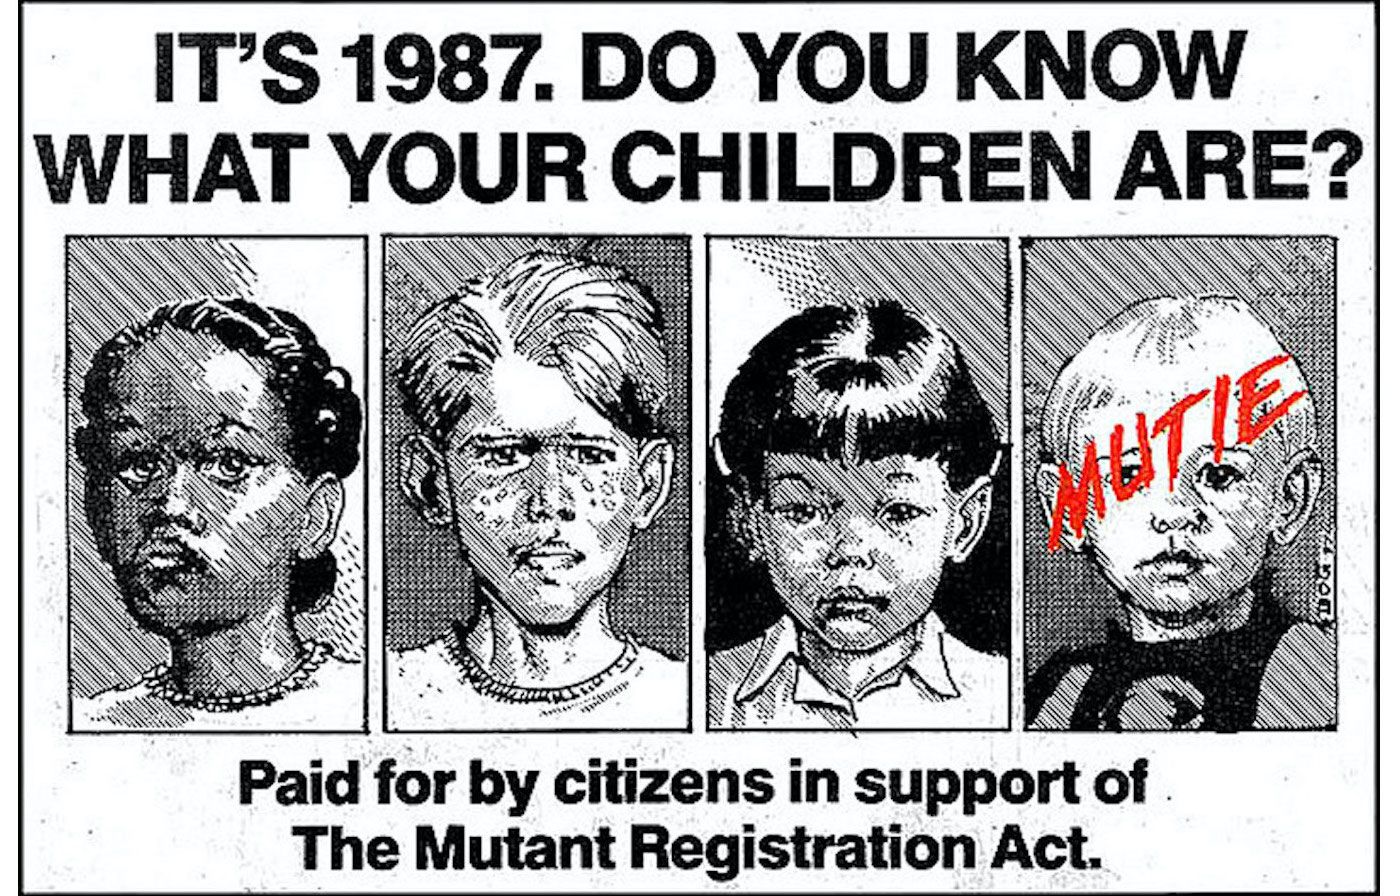 The X-Men "Do You Know What Your Children Are" ad showing a lineup of kids with one labeled mutie